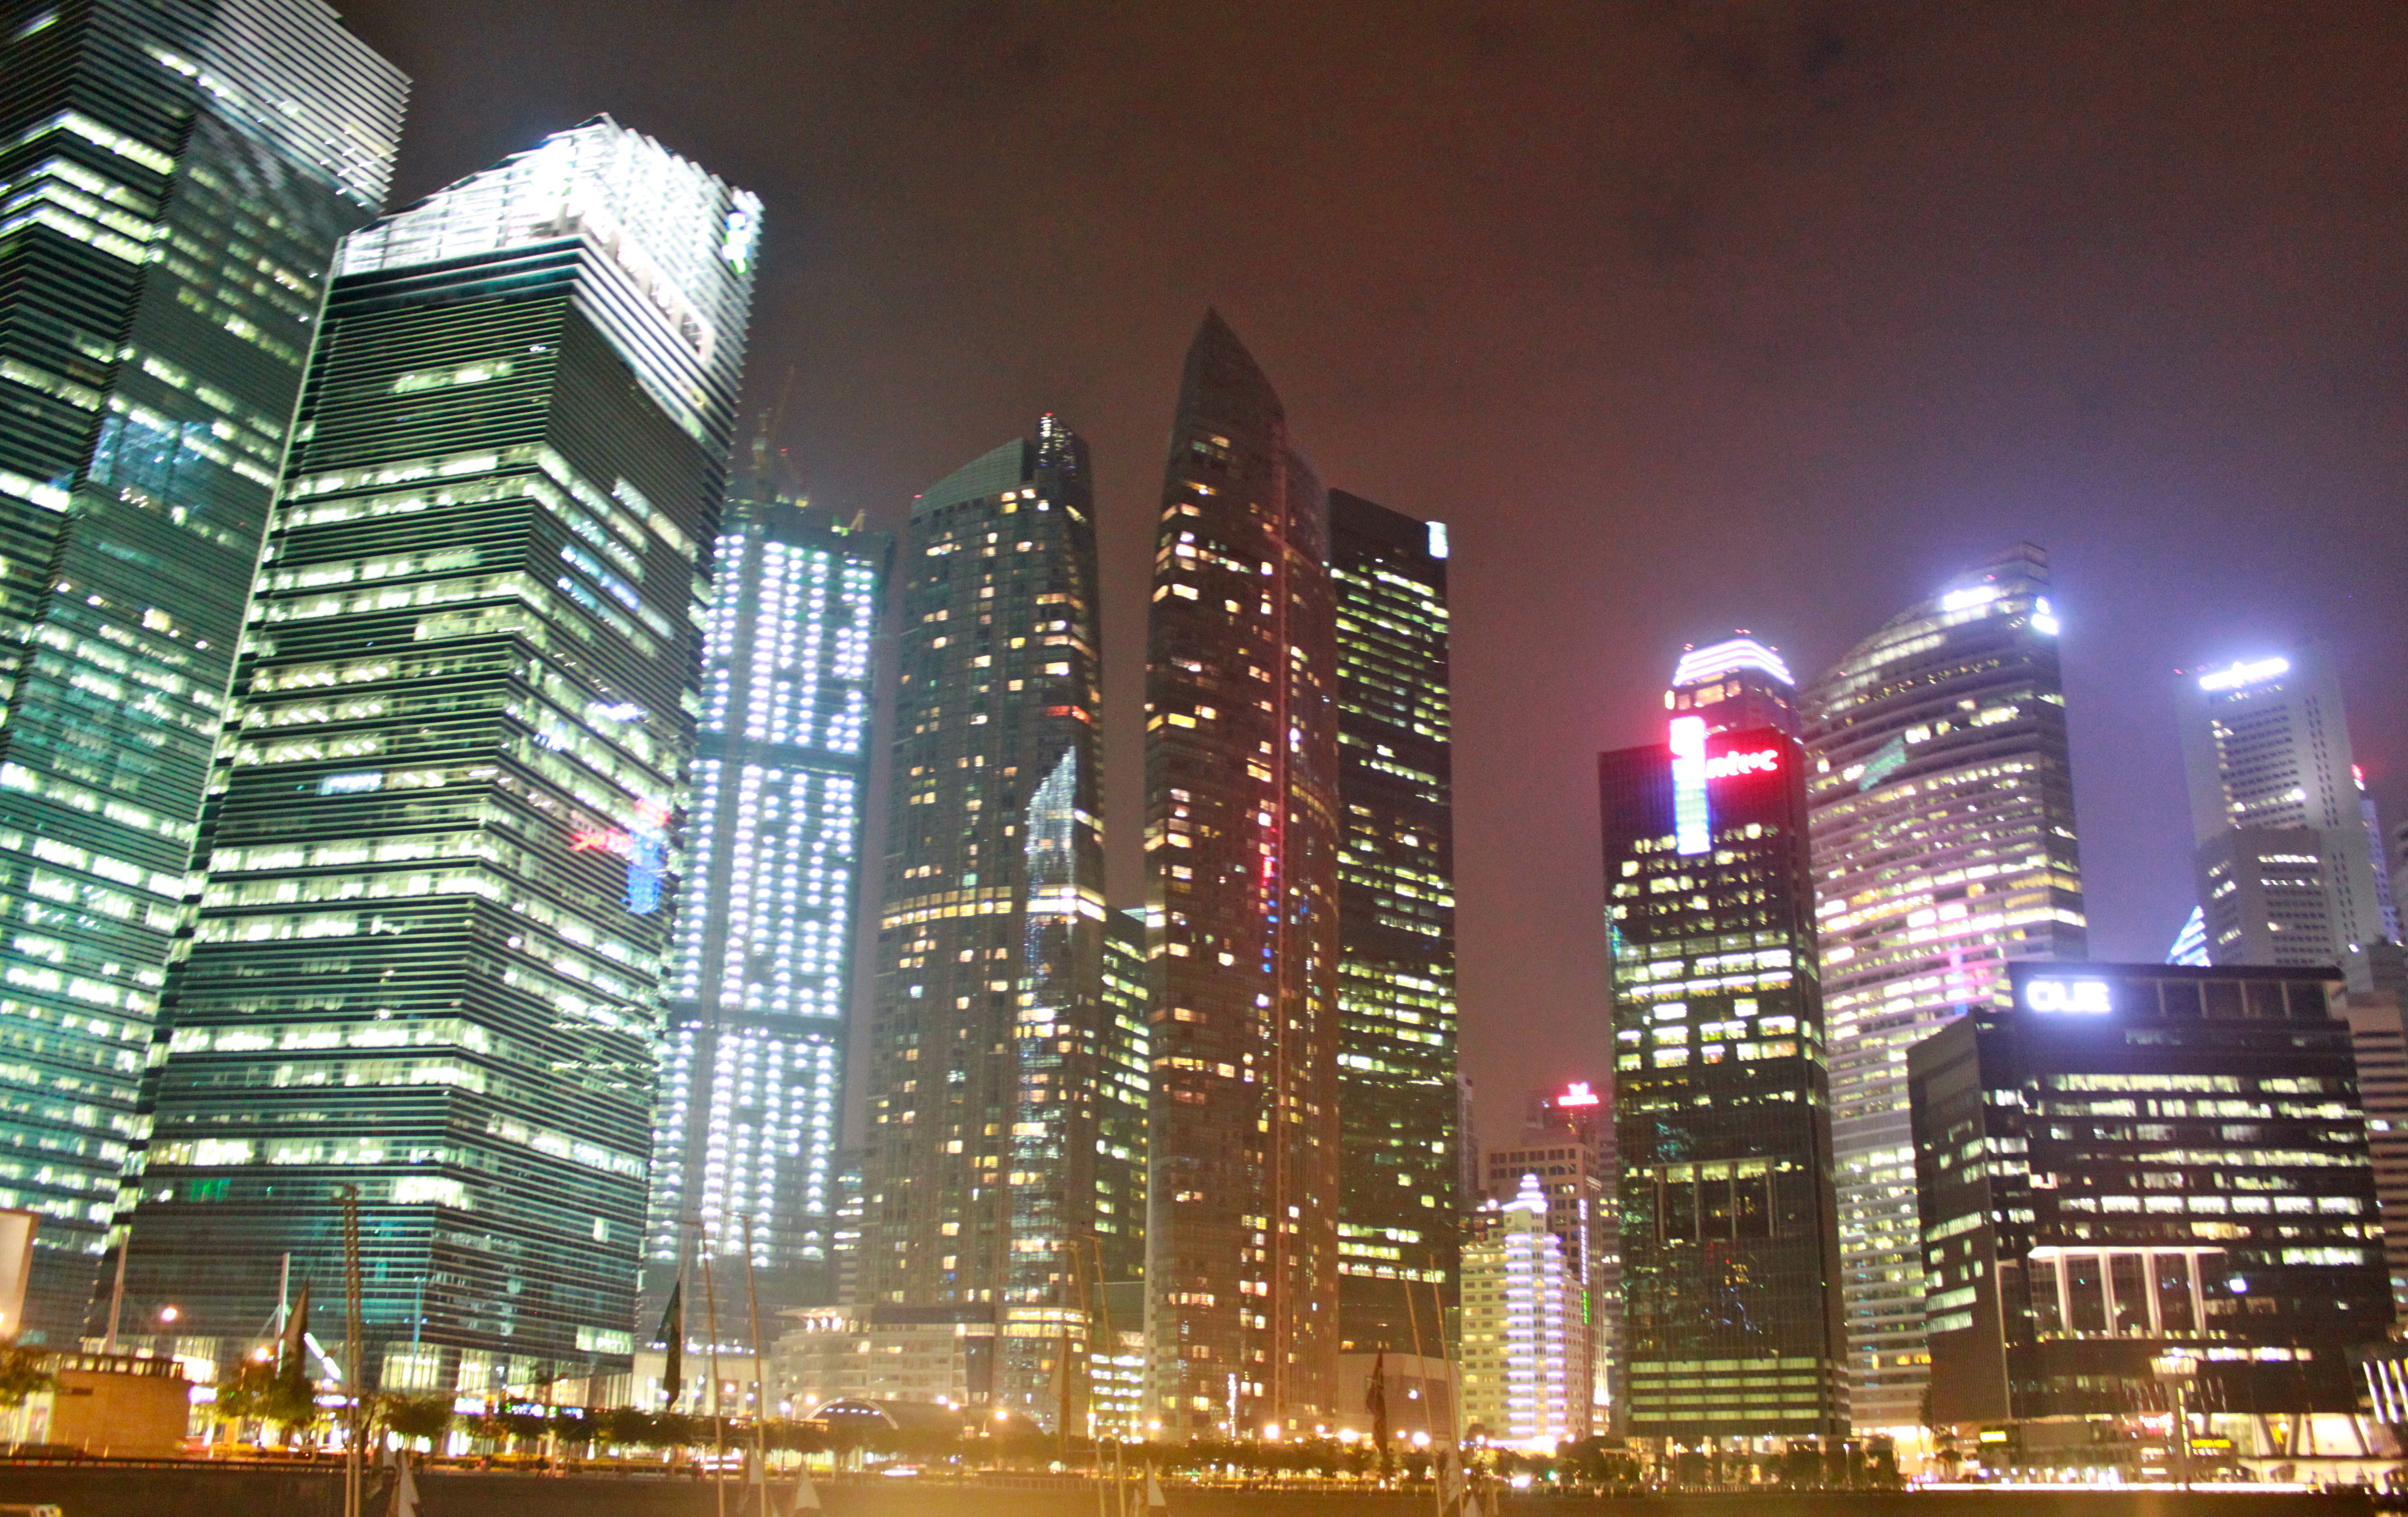 Singapore, the city that never sleeps